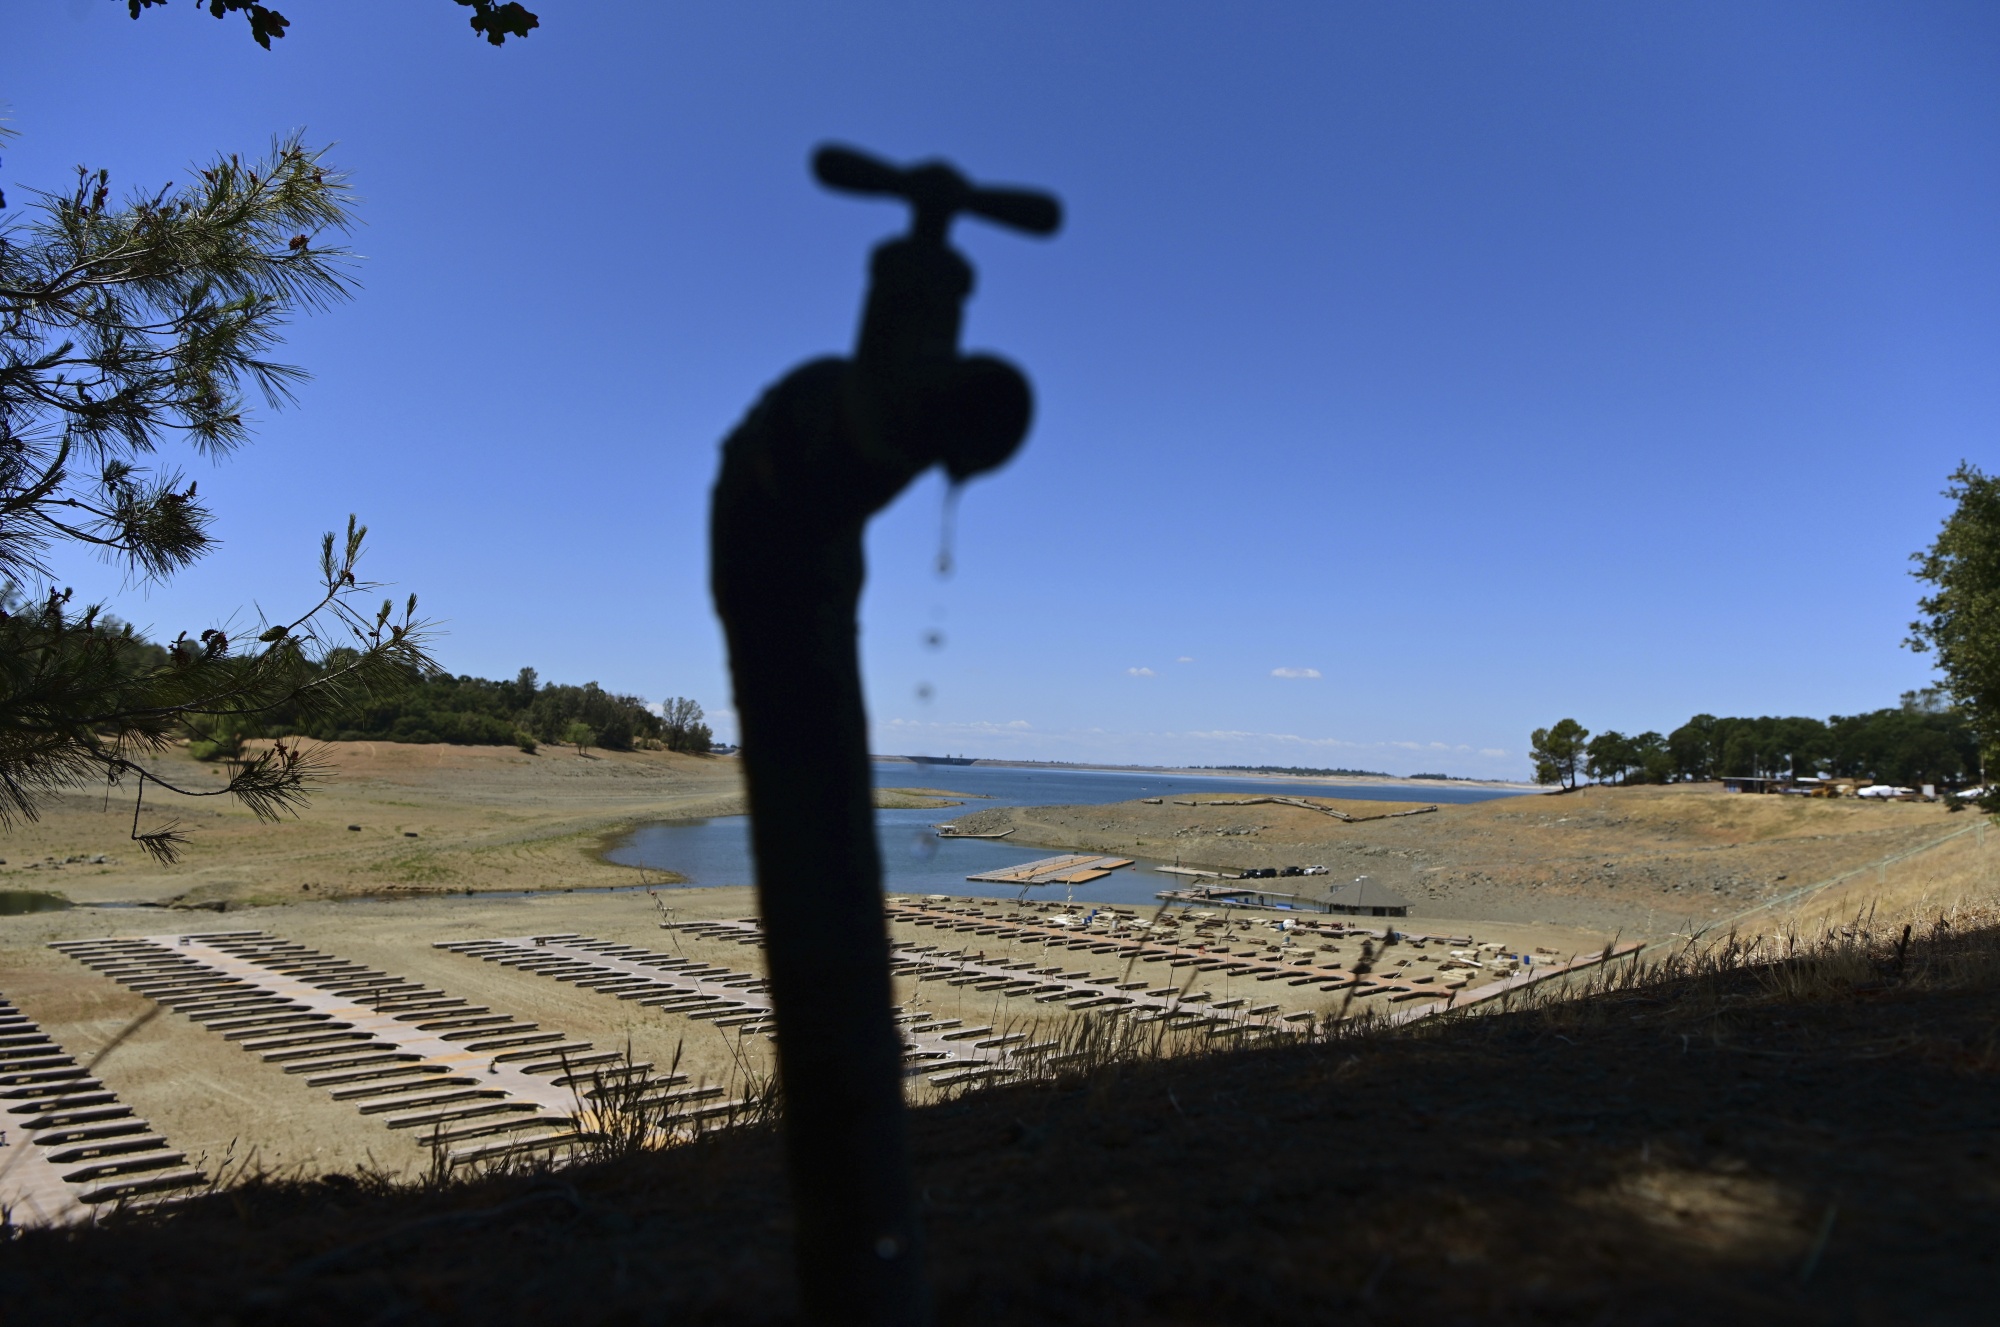 Water drips from a faucet near boat docks sitting on dry land at the Browns Ravine Cove area of drought-stricken Folsom Lake in Folsom, Calif., on May 22, 2022. The American West's megadrought deepened so much last year that it is now the driest it has been in at least 1200 years and a worst-case scenario playing out live, a new study finds. (AP Photo/Josh Edelson, File)